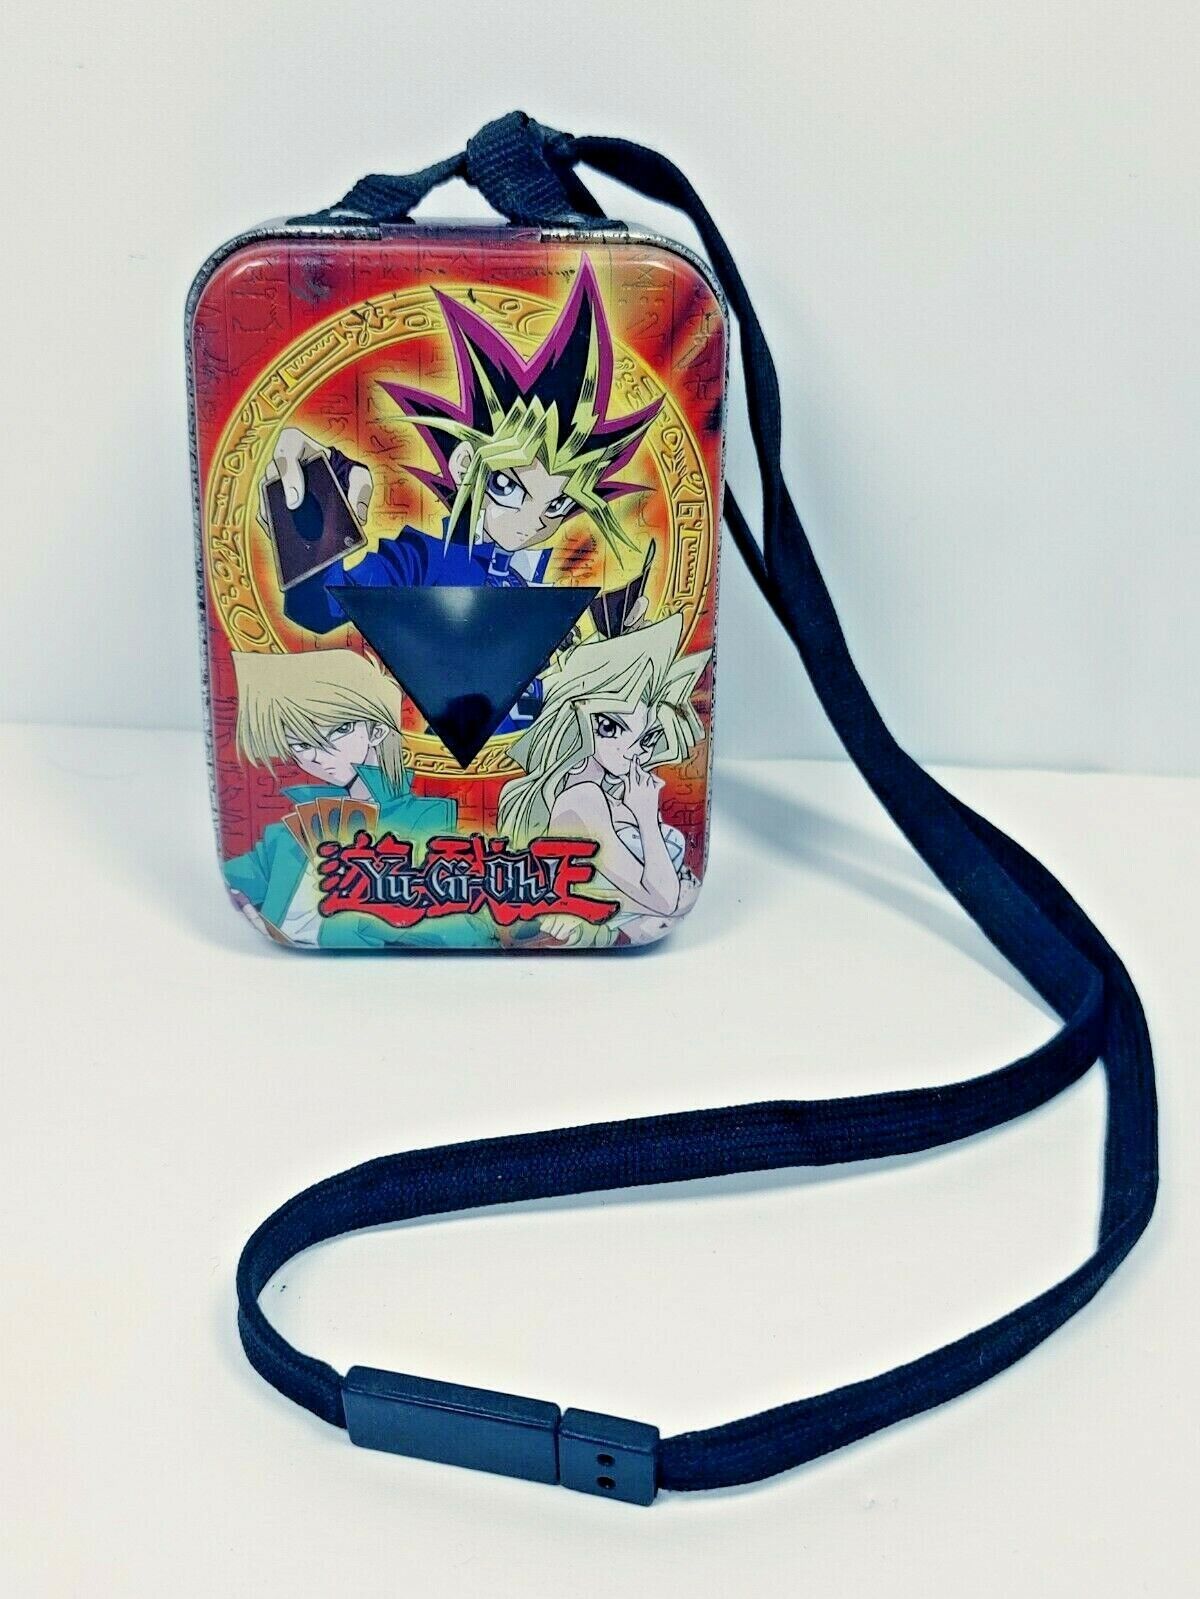 Yugioh It's Time to Duel Tin PSG 2003 with Strap Tin Metal Box Only NO CARDS - $9.95